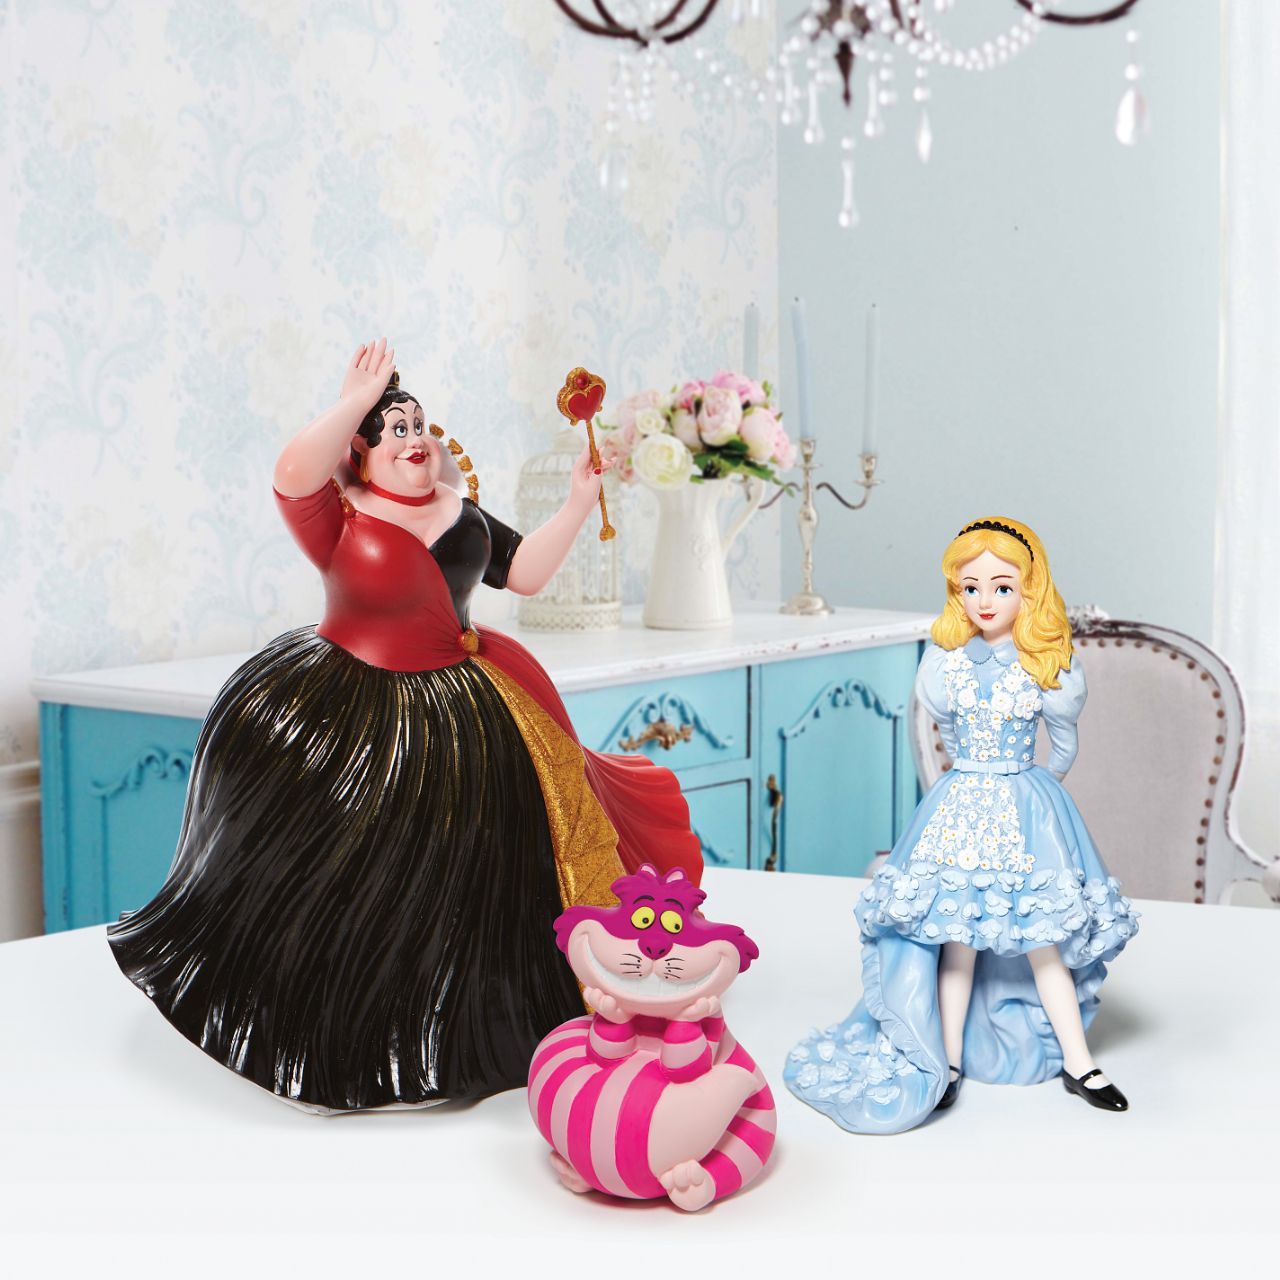 Celebrate the 70th Anniversary of Disney's animated classic film Alice in Wonderland with Alice as she's never been seen before. Part of the Disney Couture de Force Collection, Alice is the talk of Wonderland in her fashion forward tea party dress. 